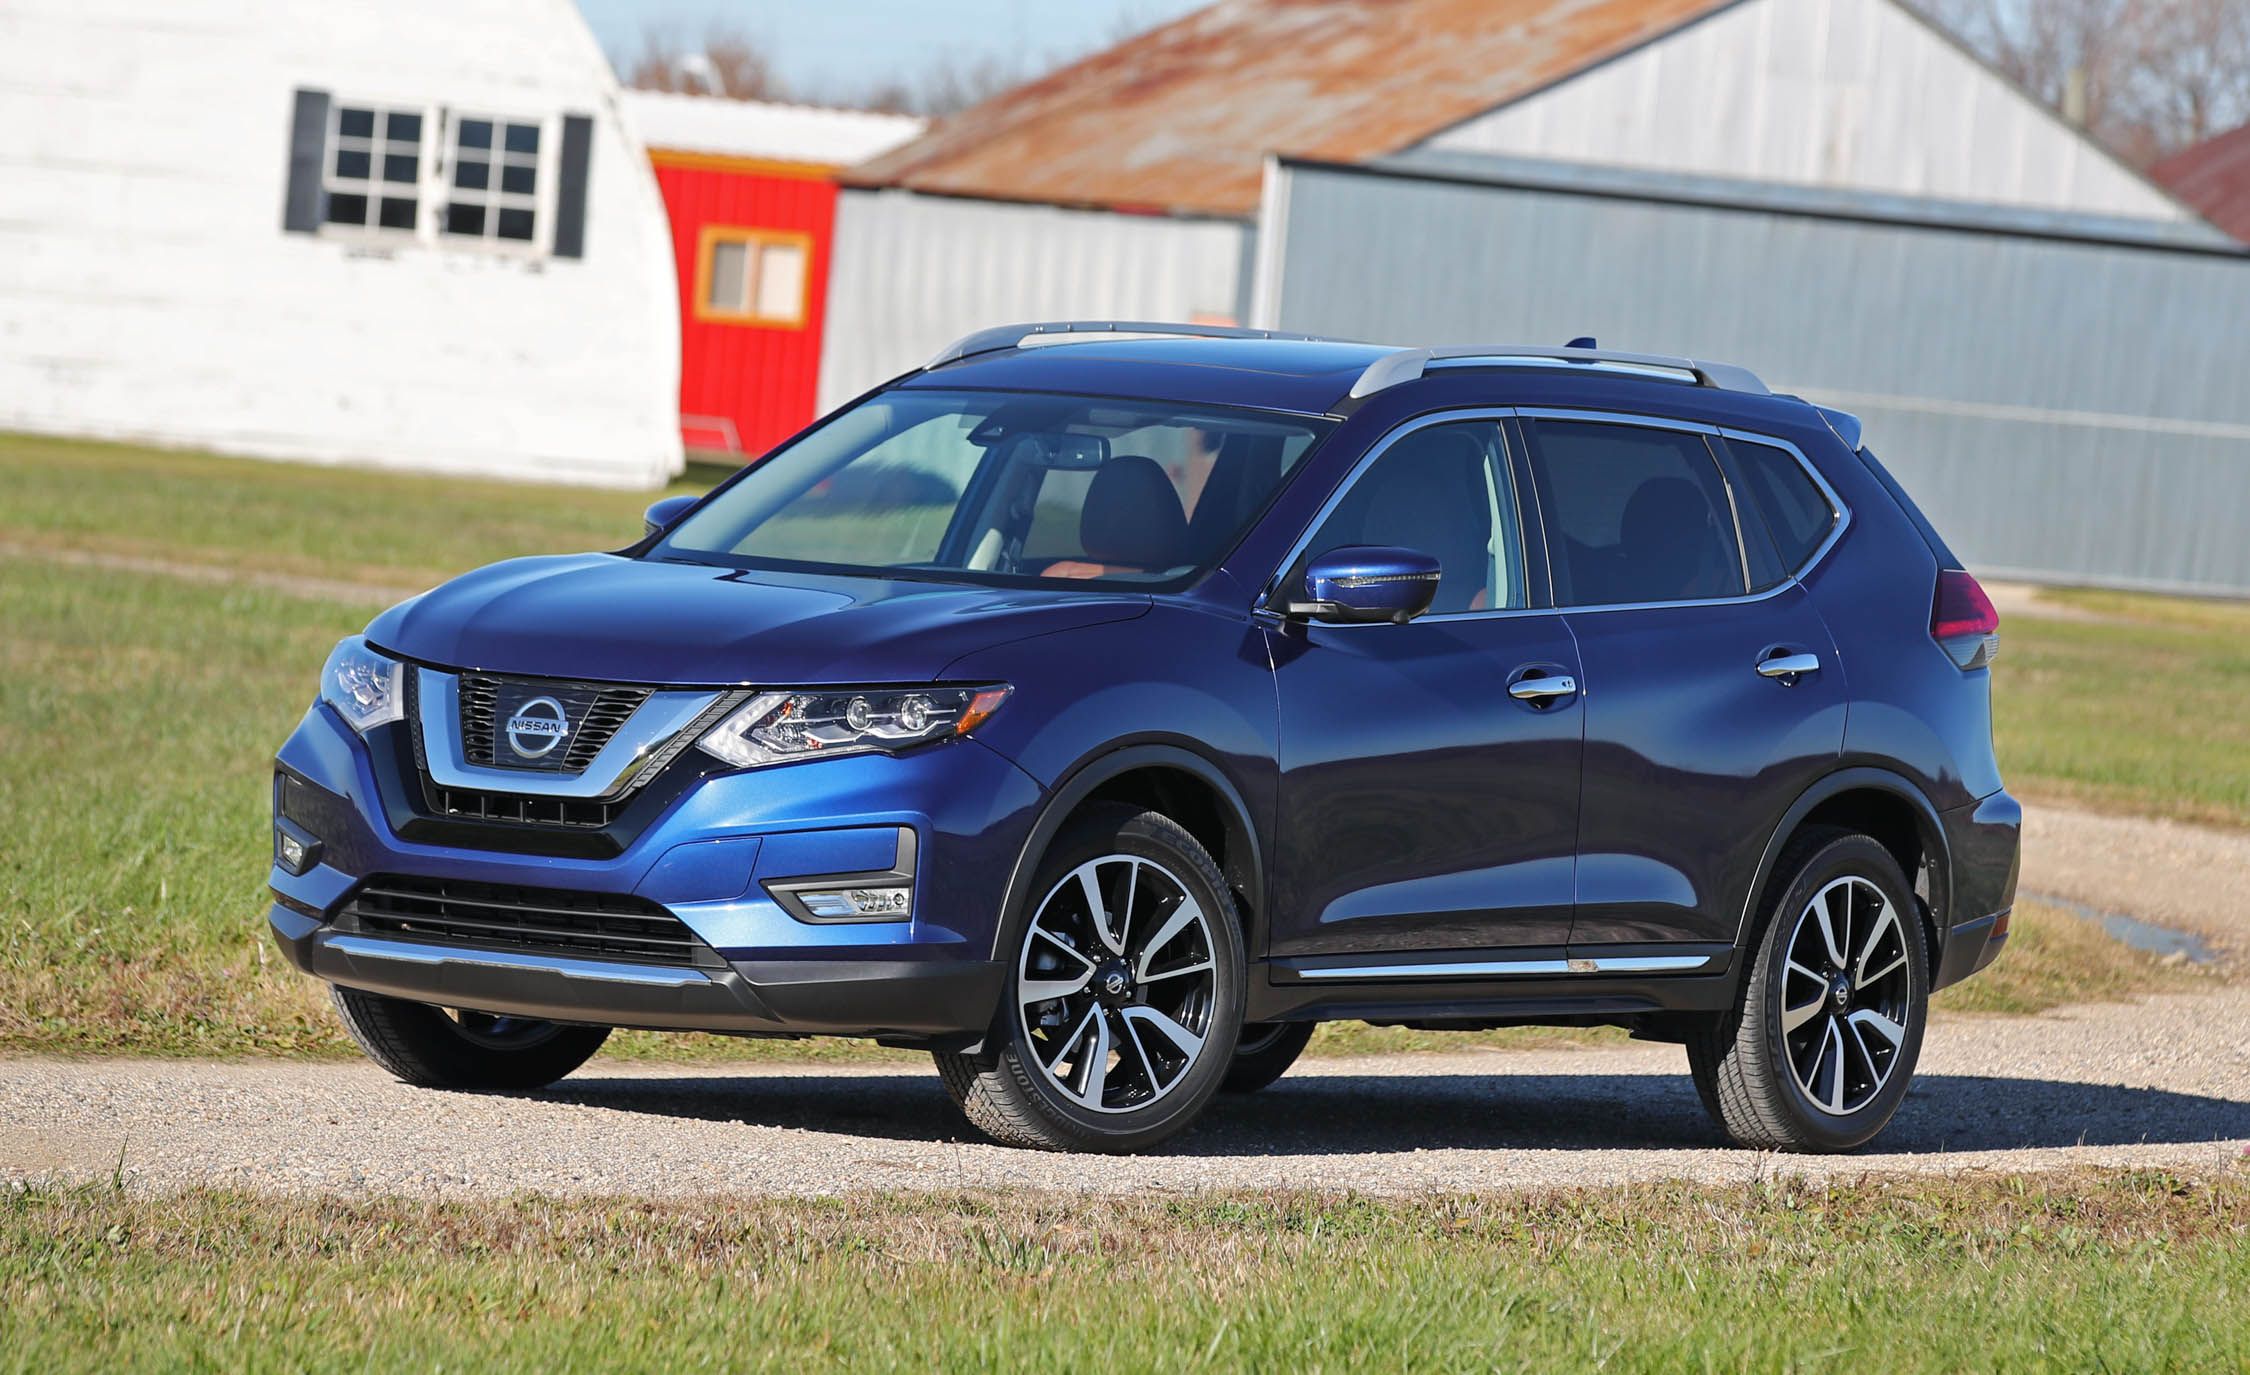 2017 Nissan Rogue Exterior Front And Side (View 37 of 37)